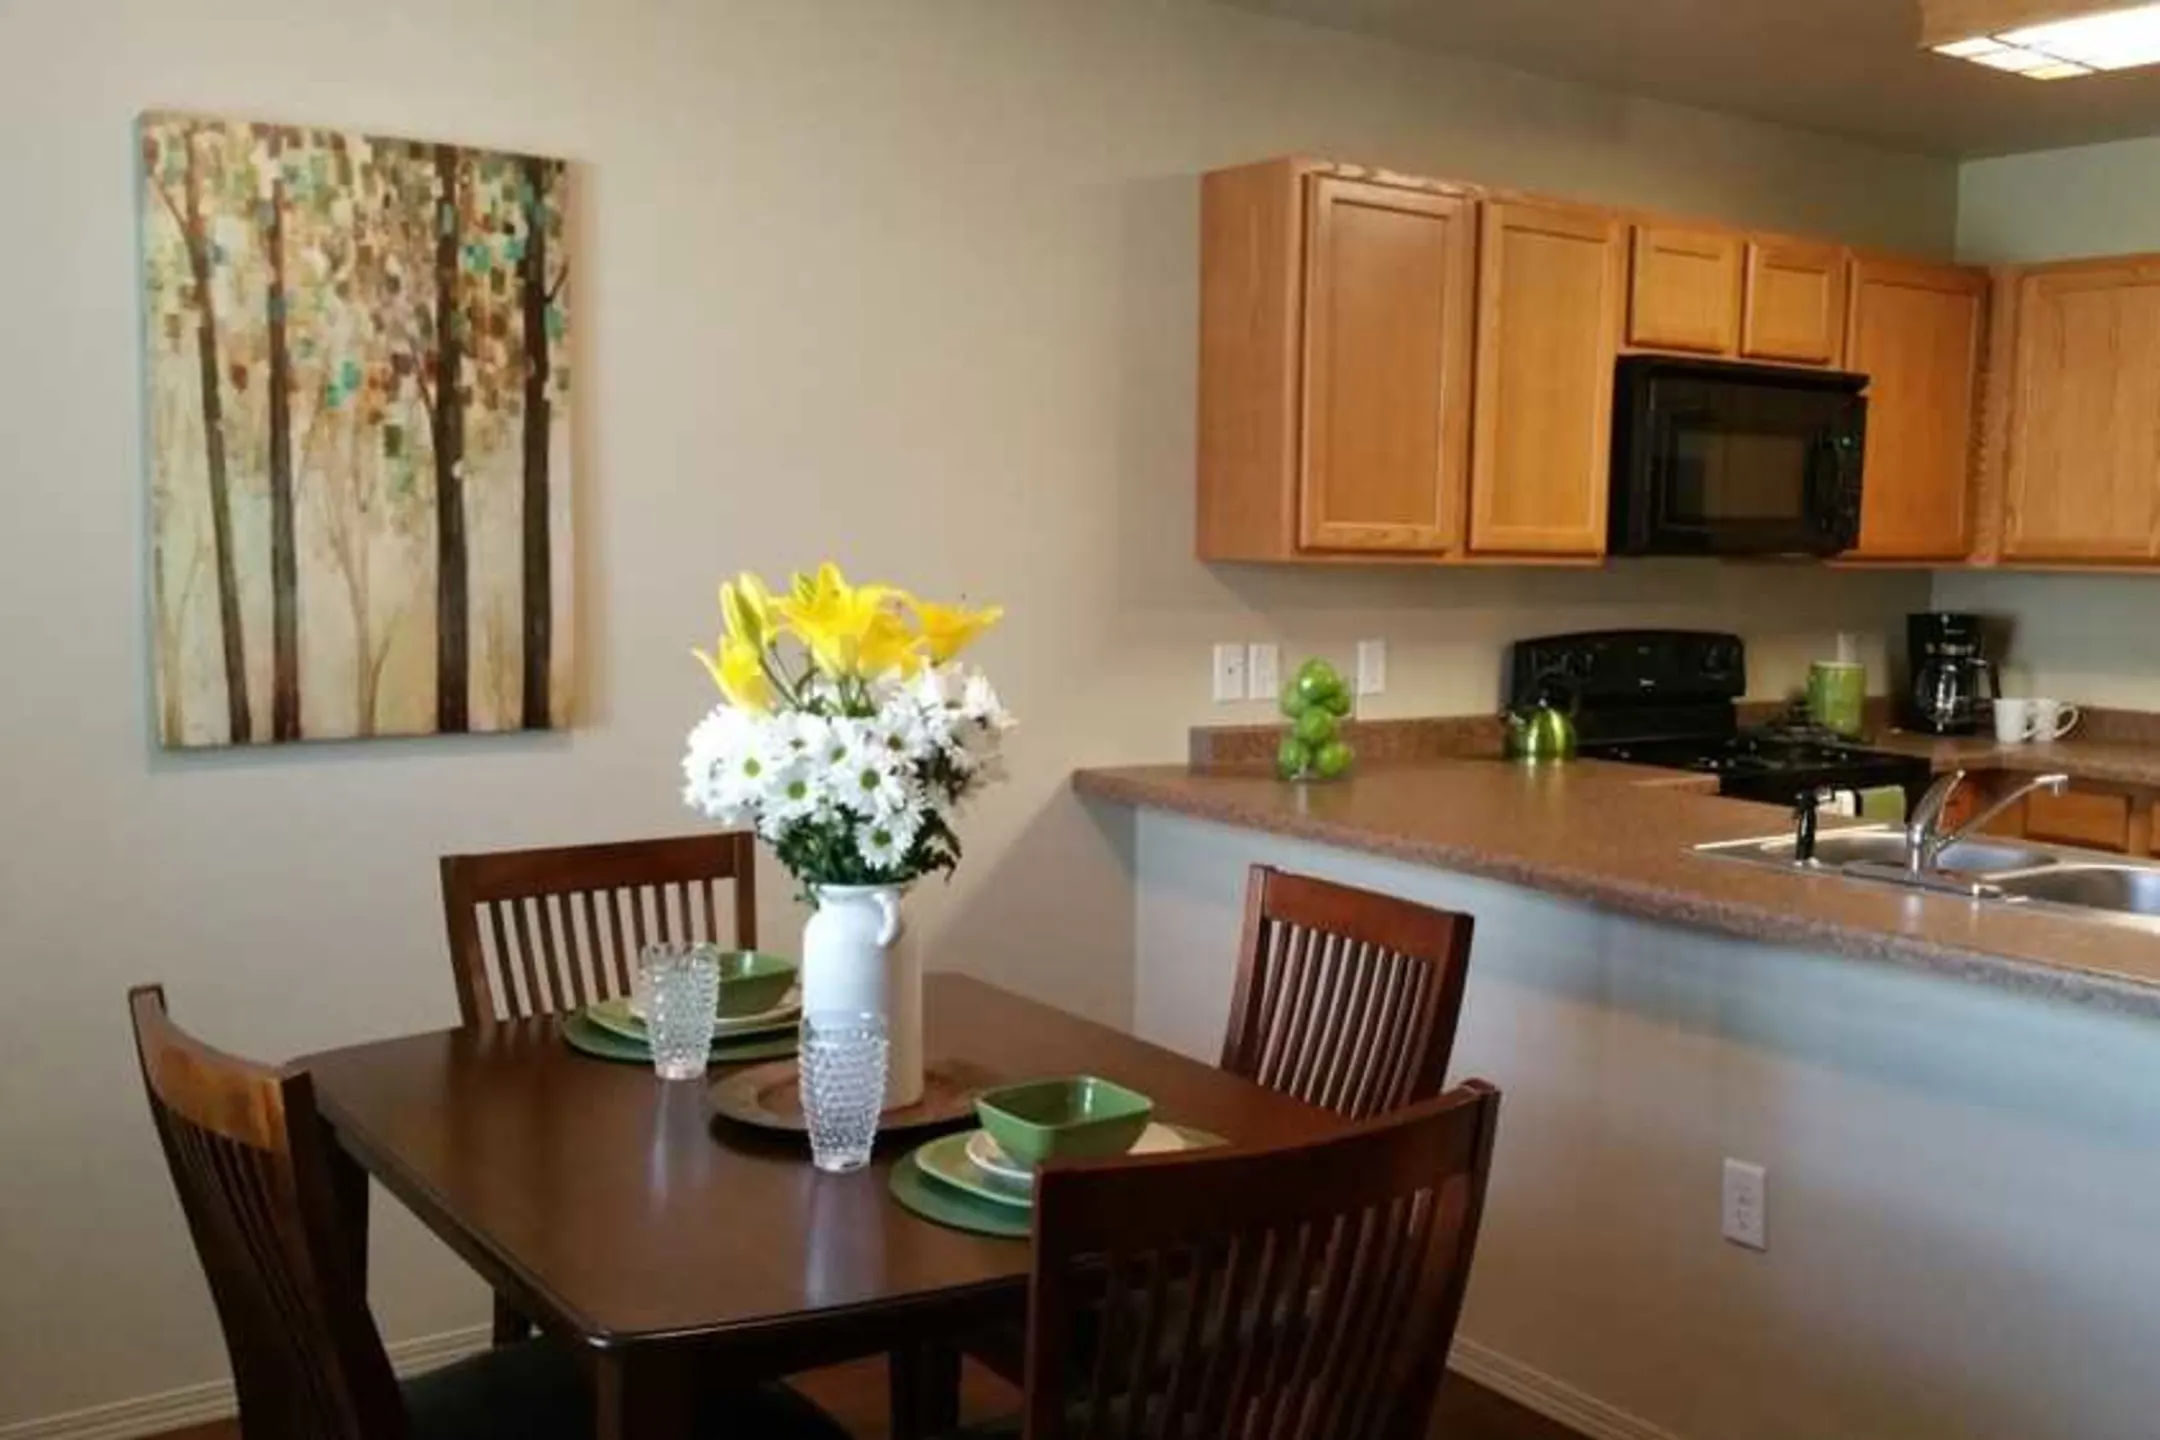 Kitchen - Prairie Meadows Townhomes - New Town, ND